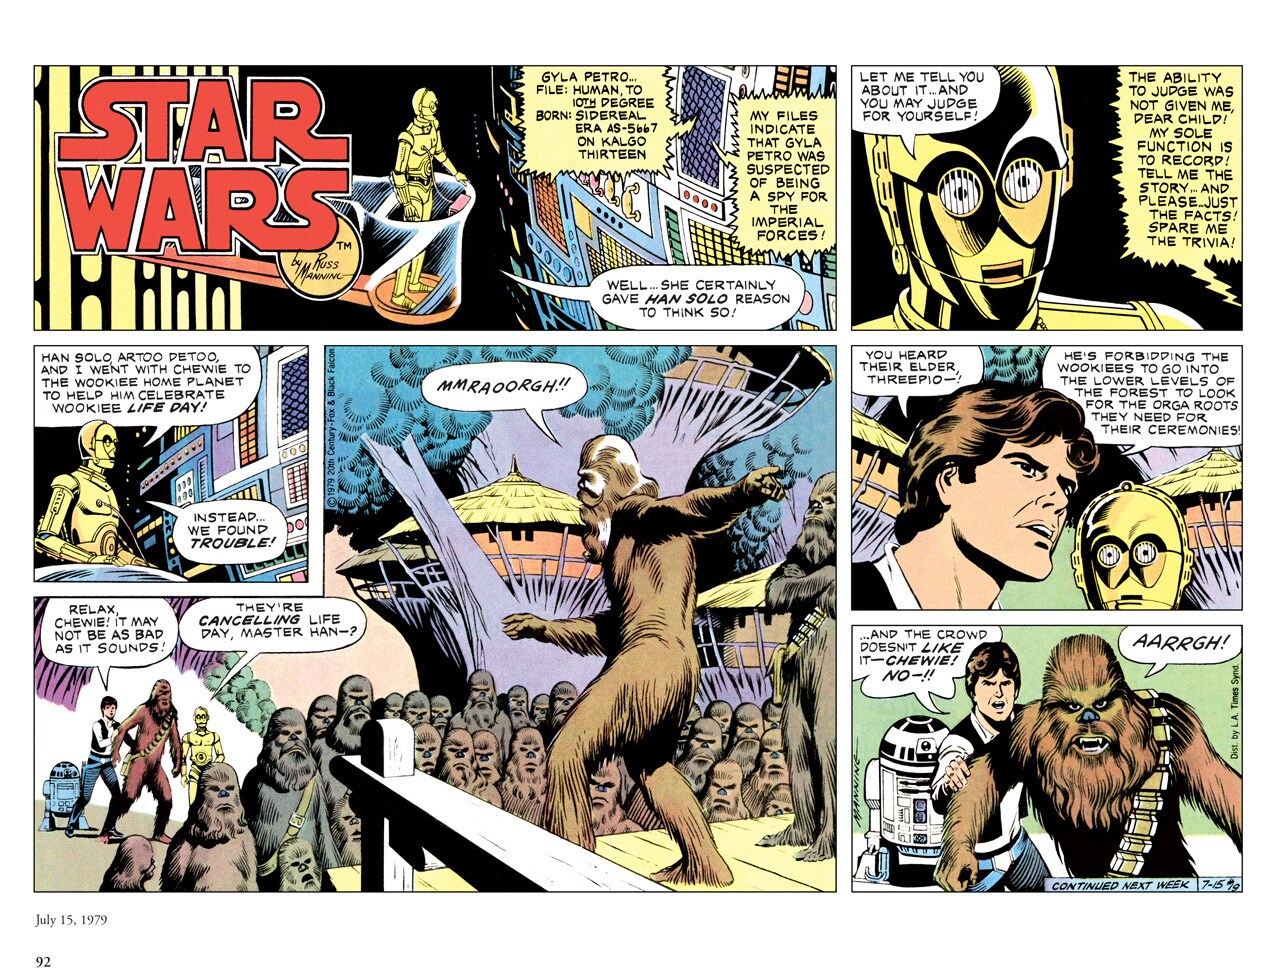 “The Kashyyyk Depths” Life Day story from the Star Wars newspaper strip.